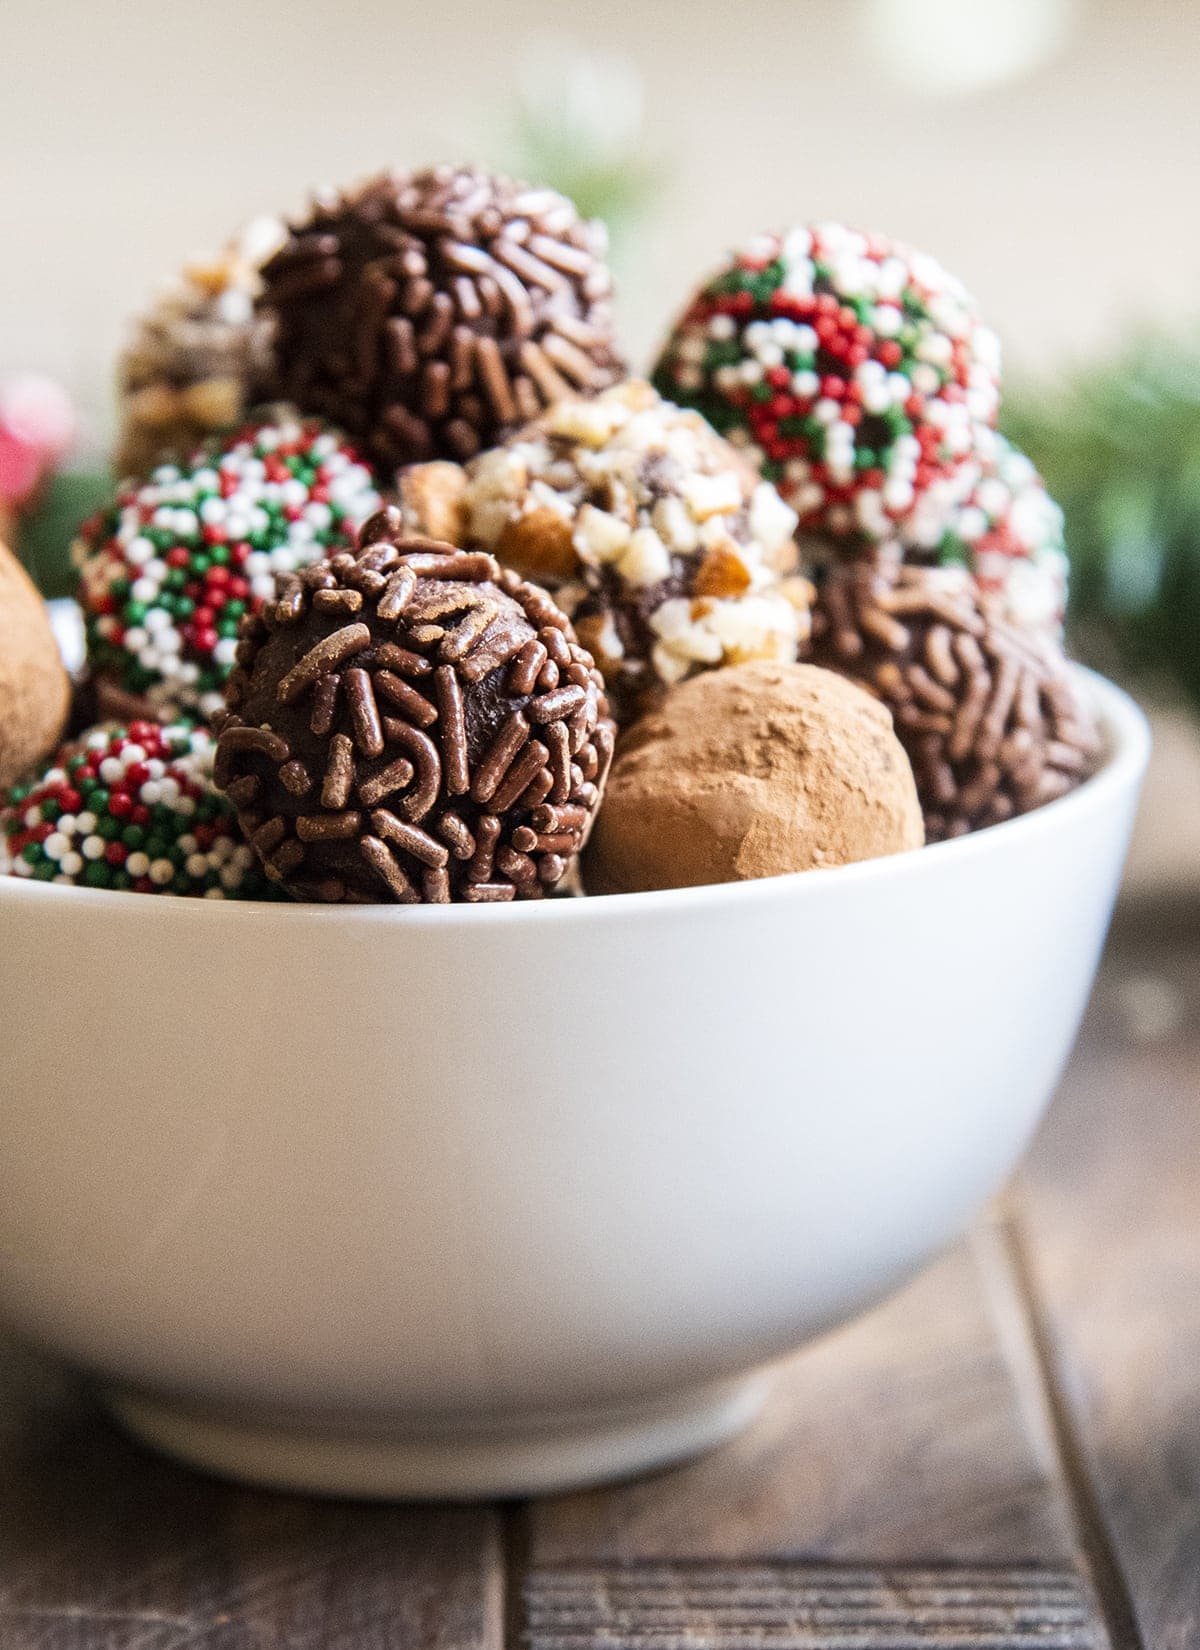 A white bowl full of chocolate truffles, some are coated in chocolate sprinkles, some in cocoa, some in chopped nuts.